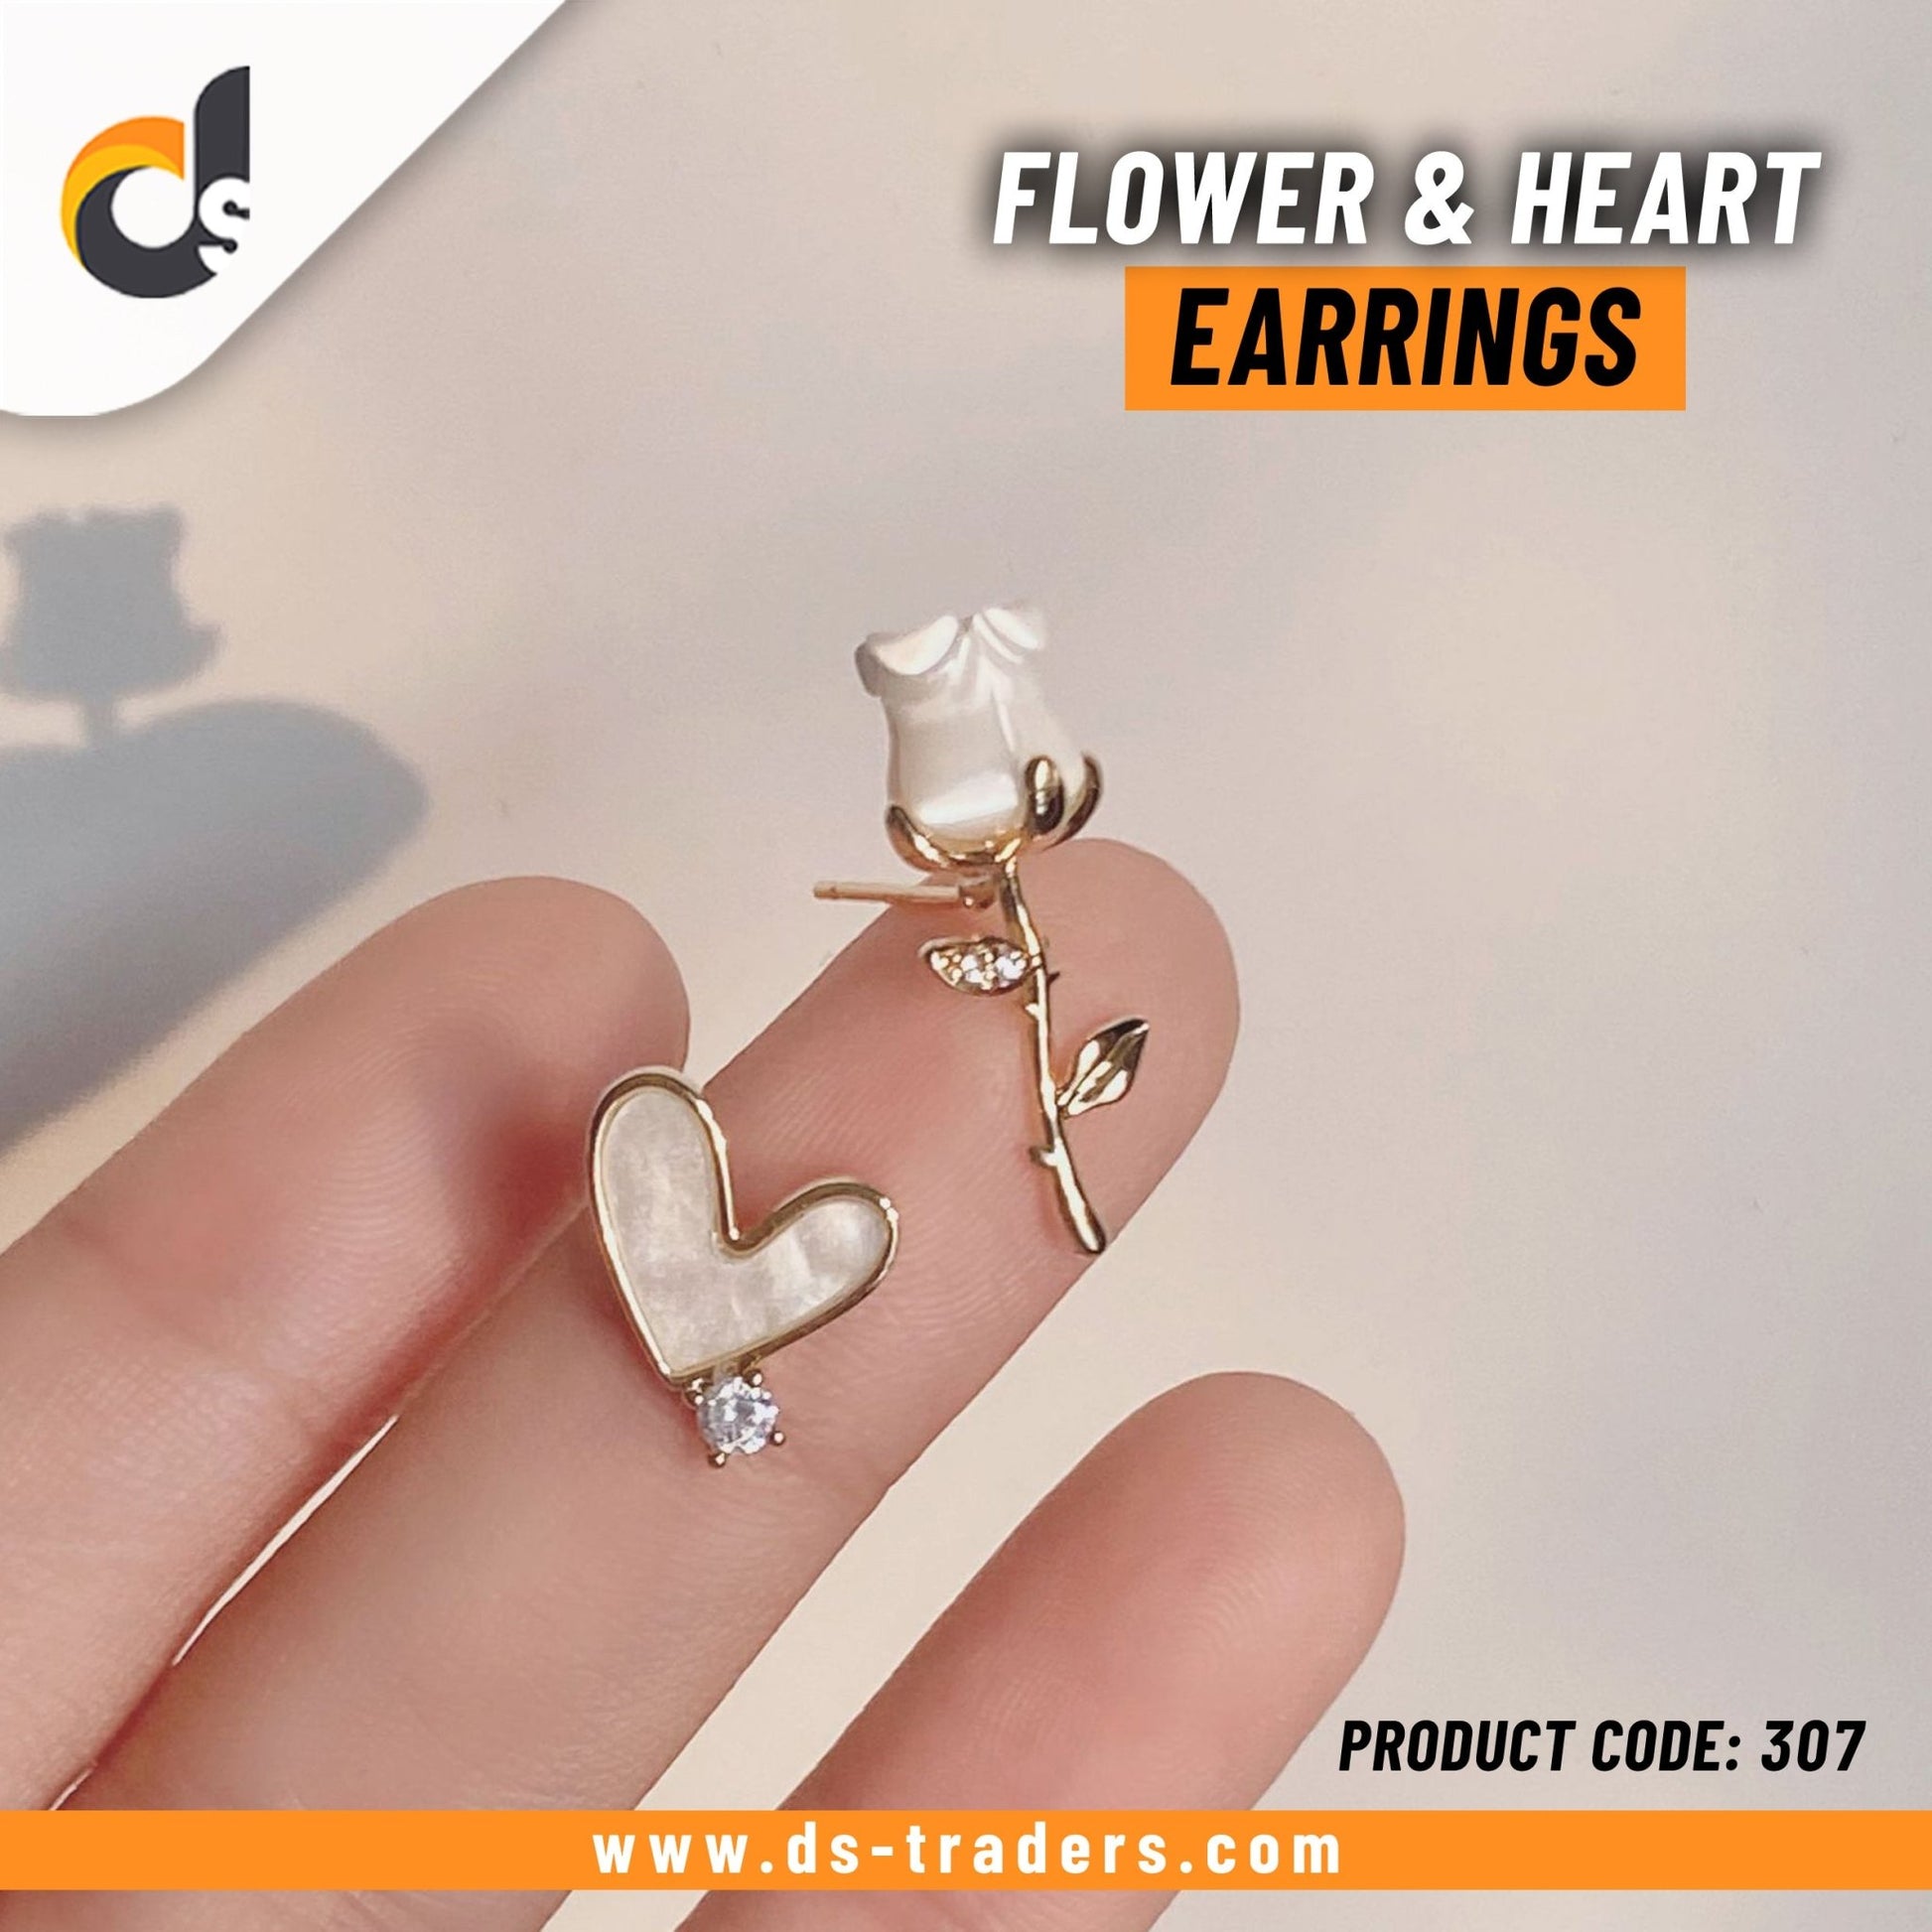 Flower and Heart Earrings - DS Traders